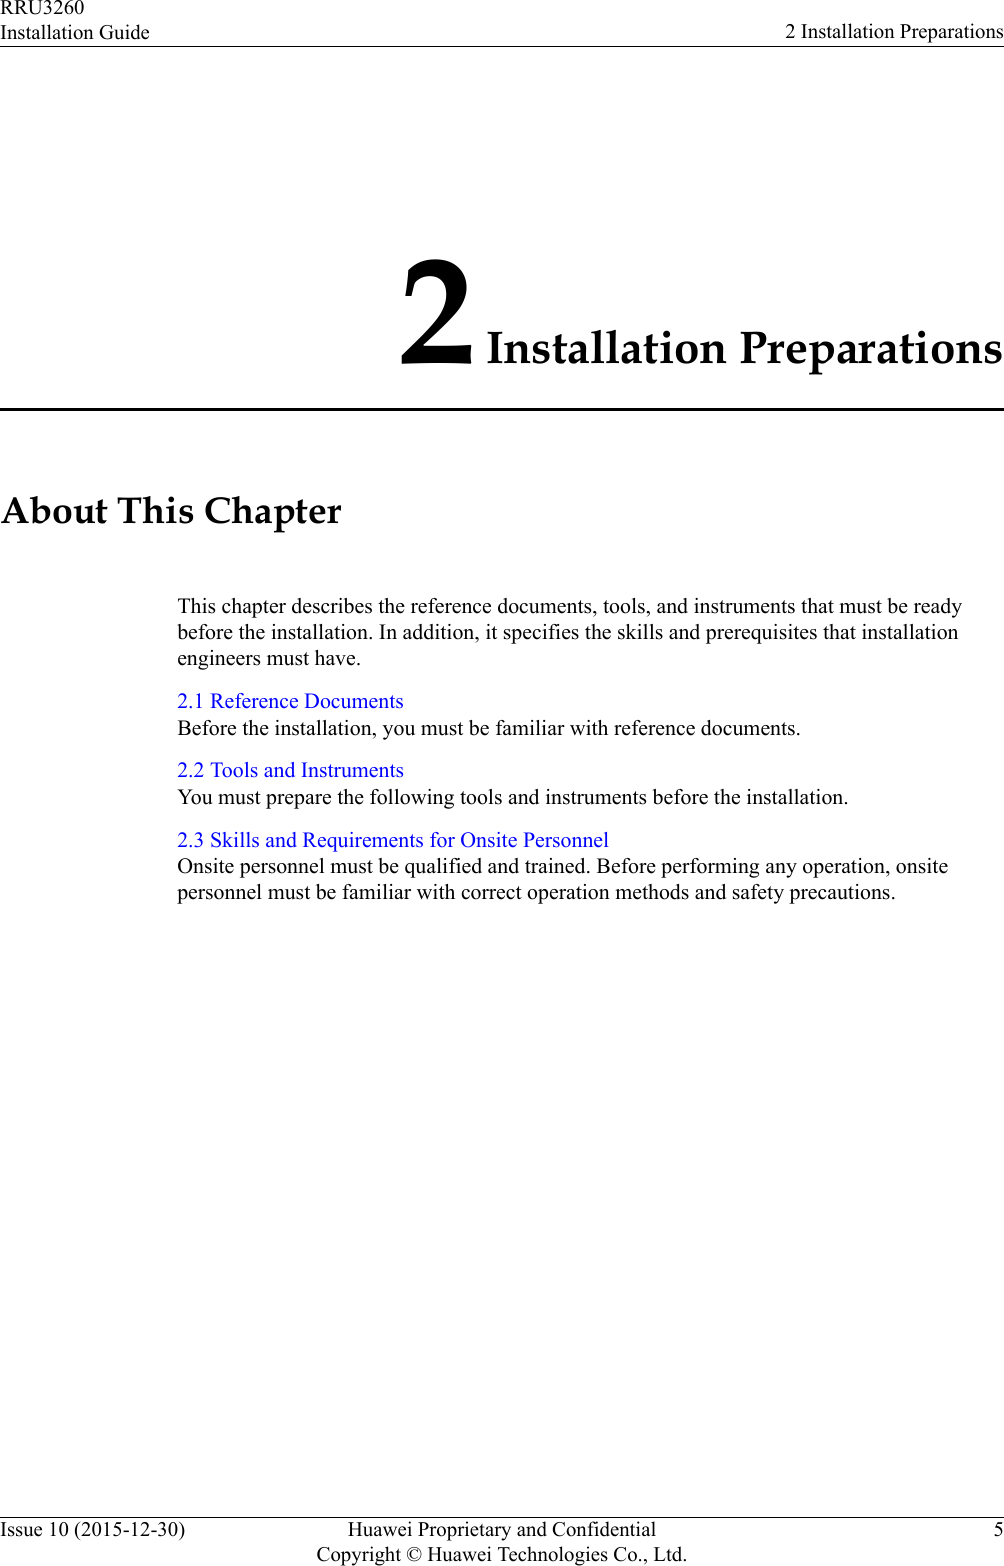 2 Installation PreparationsAbout This ChapterThis chapter describes the reference documents, tools, and instruments that must be readybefore the installation. In addition, it specifies the skills and prerequisites that installationengineers must have.2.1 Reference DocumentsBefore the installation, you must be familiar with reference documents.2.2 Tools and InstrumentsYou must prepare the following tools and instruments before the installation.2.3 Skills and Requirements for Onsite PersonnelOnsite personnel must be qualified and trained. Before performing any operation, onsitepersonnel must be familiar with correct operation methods and safety precautions.RRU3260Installation Guide 2 Installation PreparationsIssue 10 (2015-12-30) Huawei Proprietary and ConfidentialCopyright © Huawei Technologies Co., Ltd.5